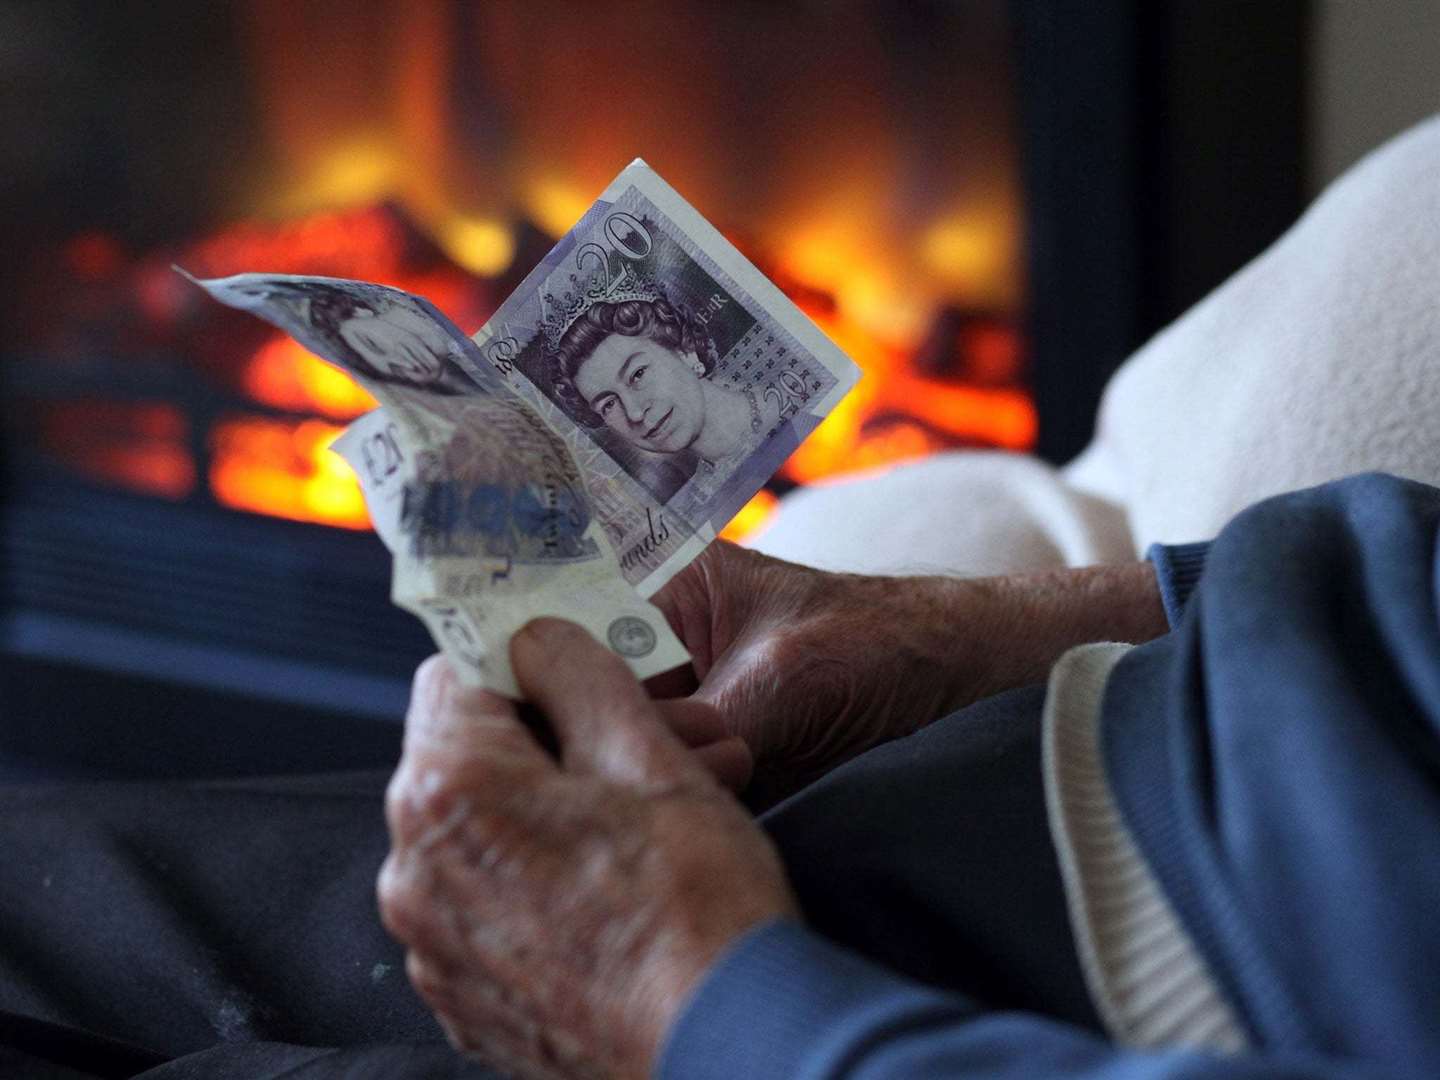 Age Scotland has welcomed the First Minister's rent freeze for private and socially rented homes as older people struggle with the cost of living crisis.